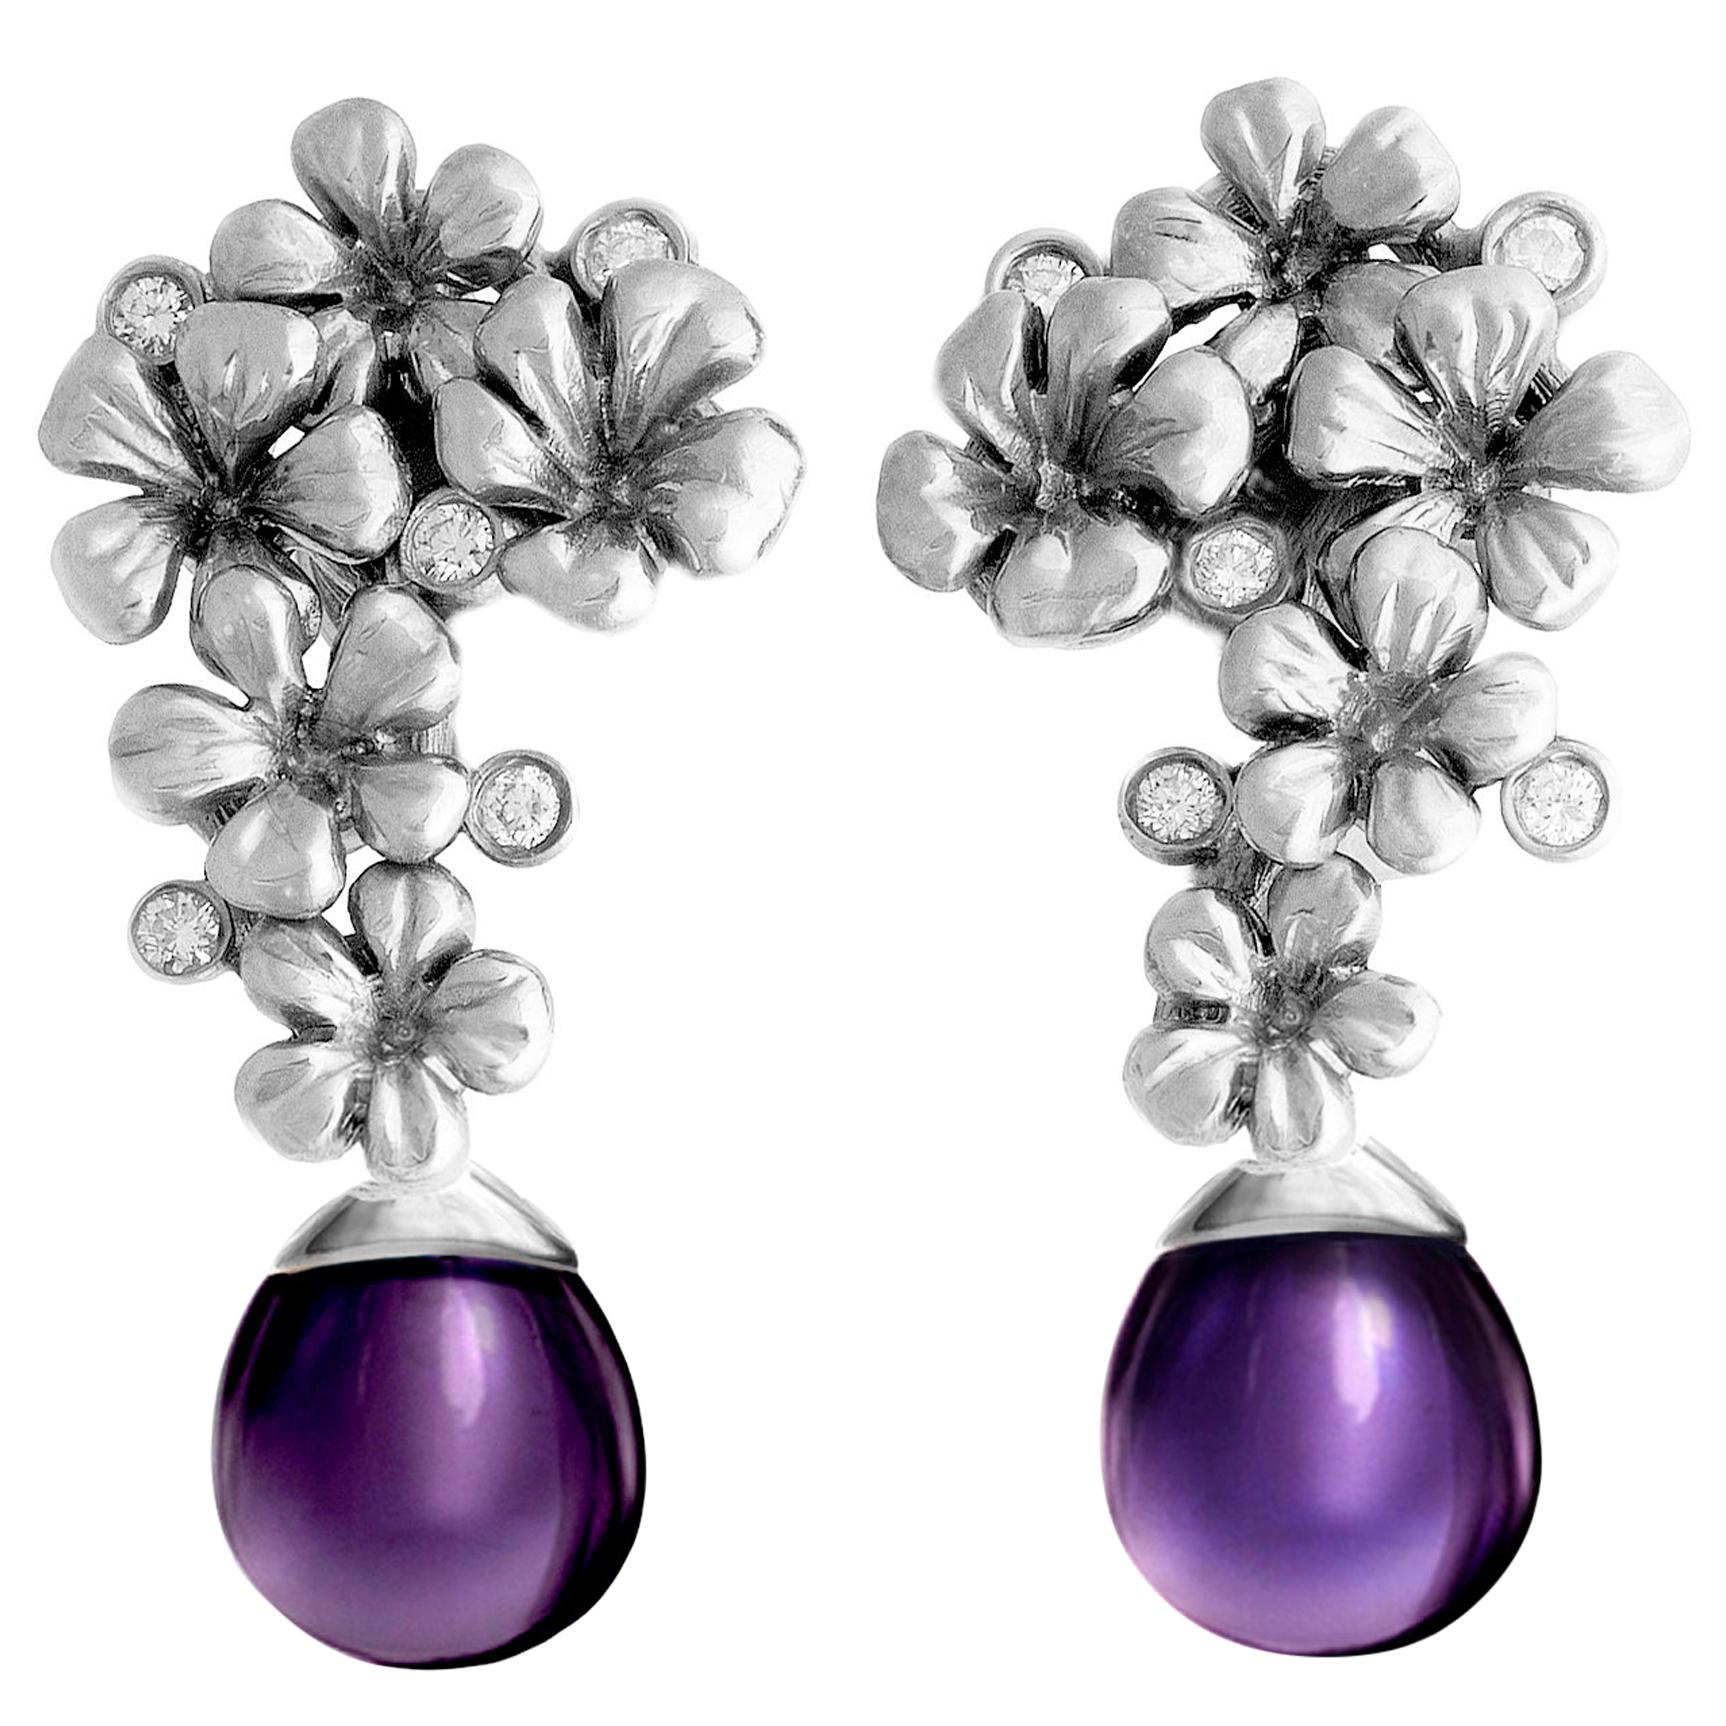 Eighteen Karat Gold Modern Cocktail Earrings with Round Diamonds and Amethysts